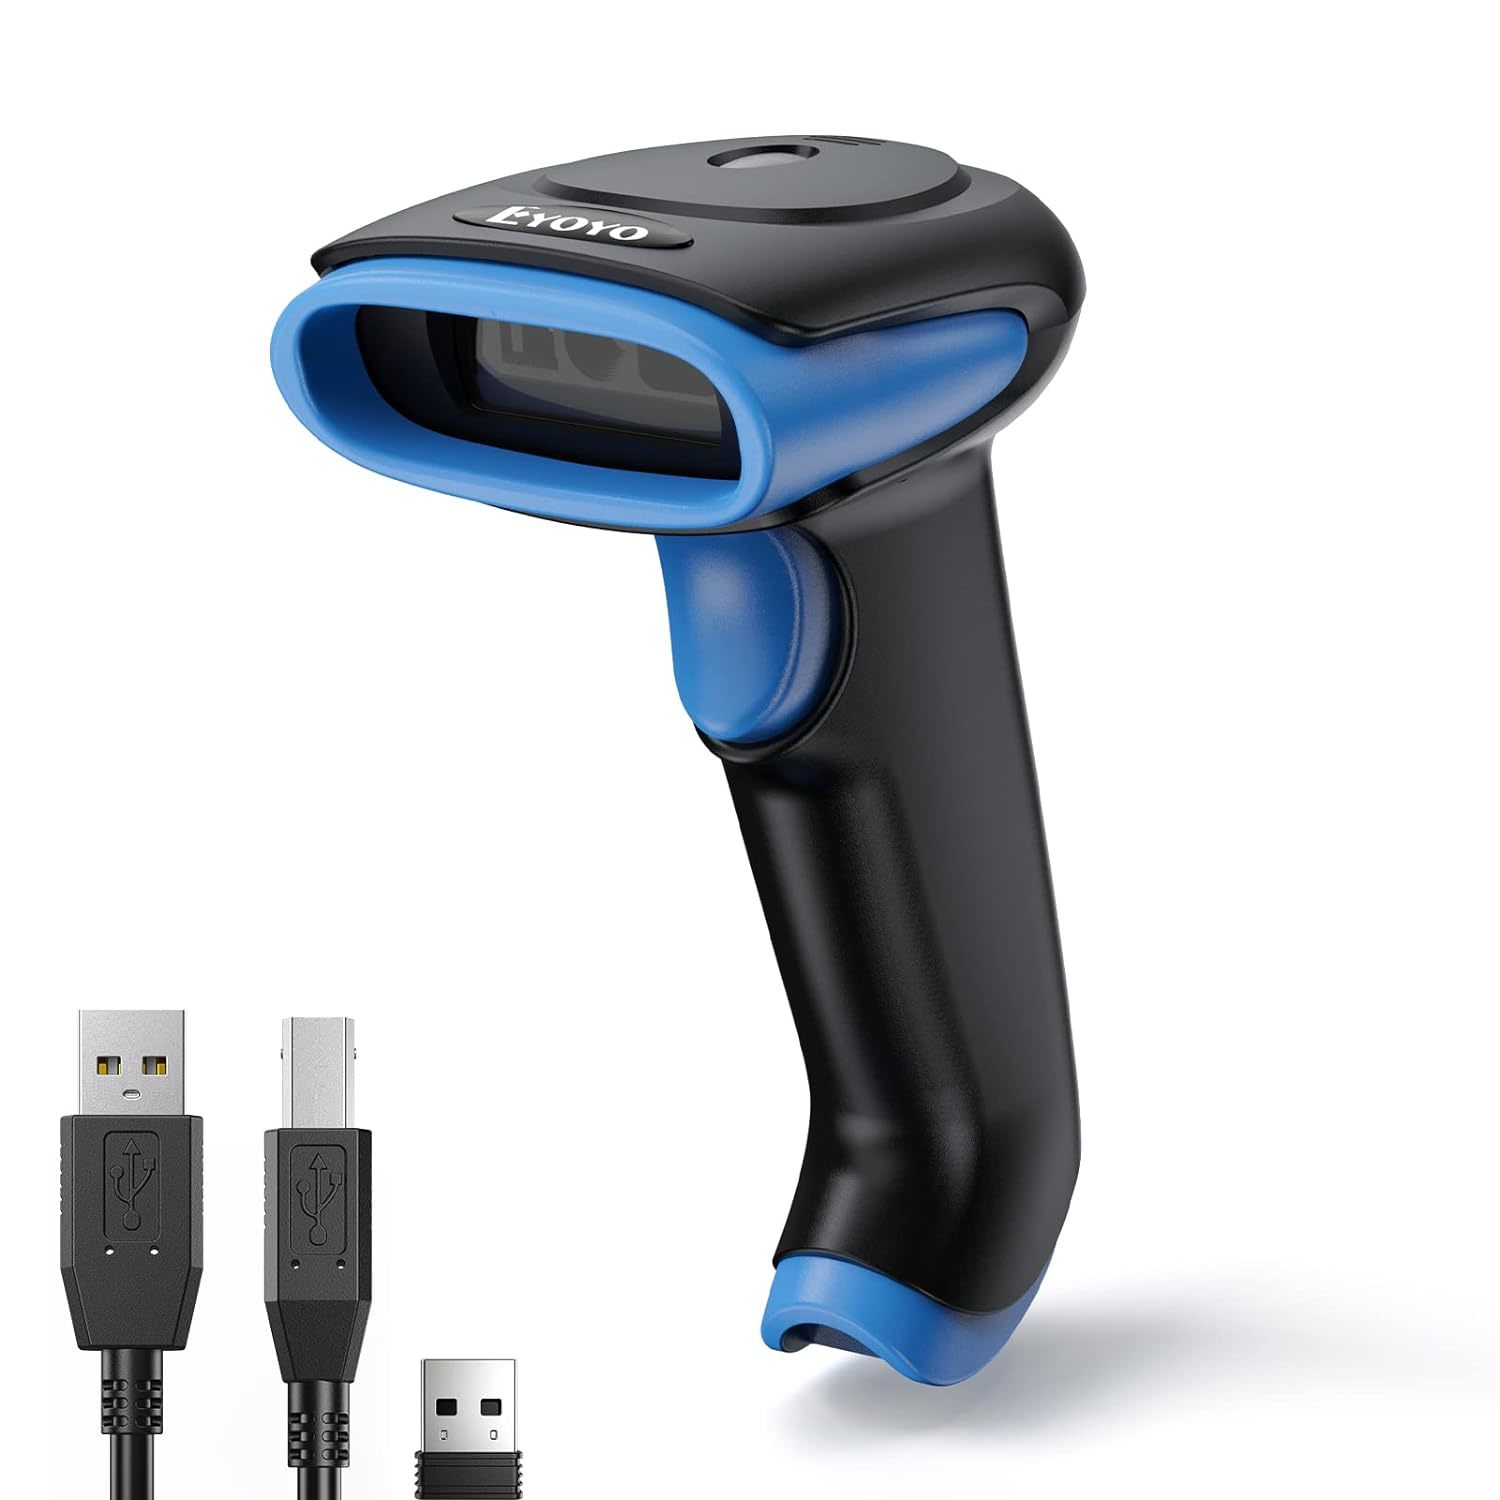 Primary image for Eyoyo Barcode Scanner, 2500mAh Wireless Barcode Scanner for Inventory, Cordless 